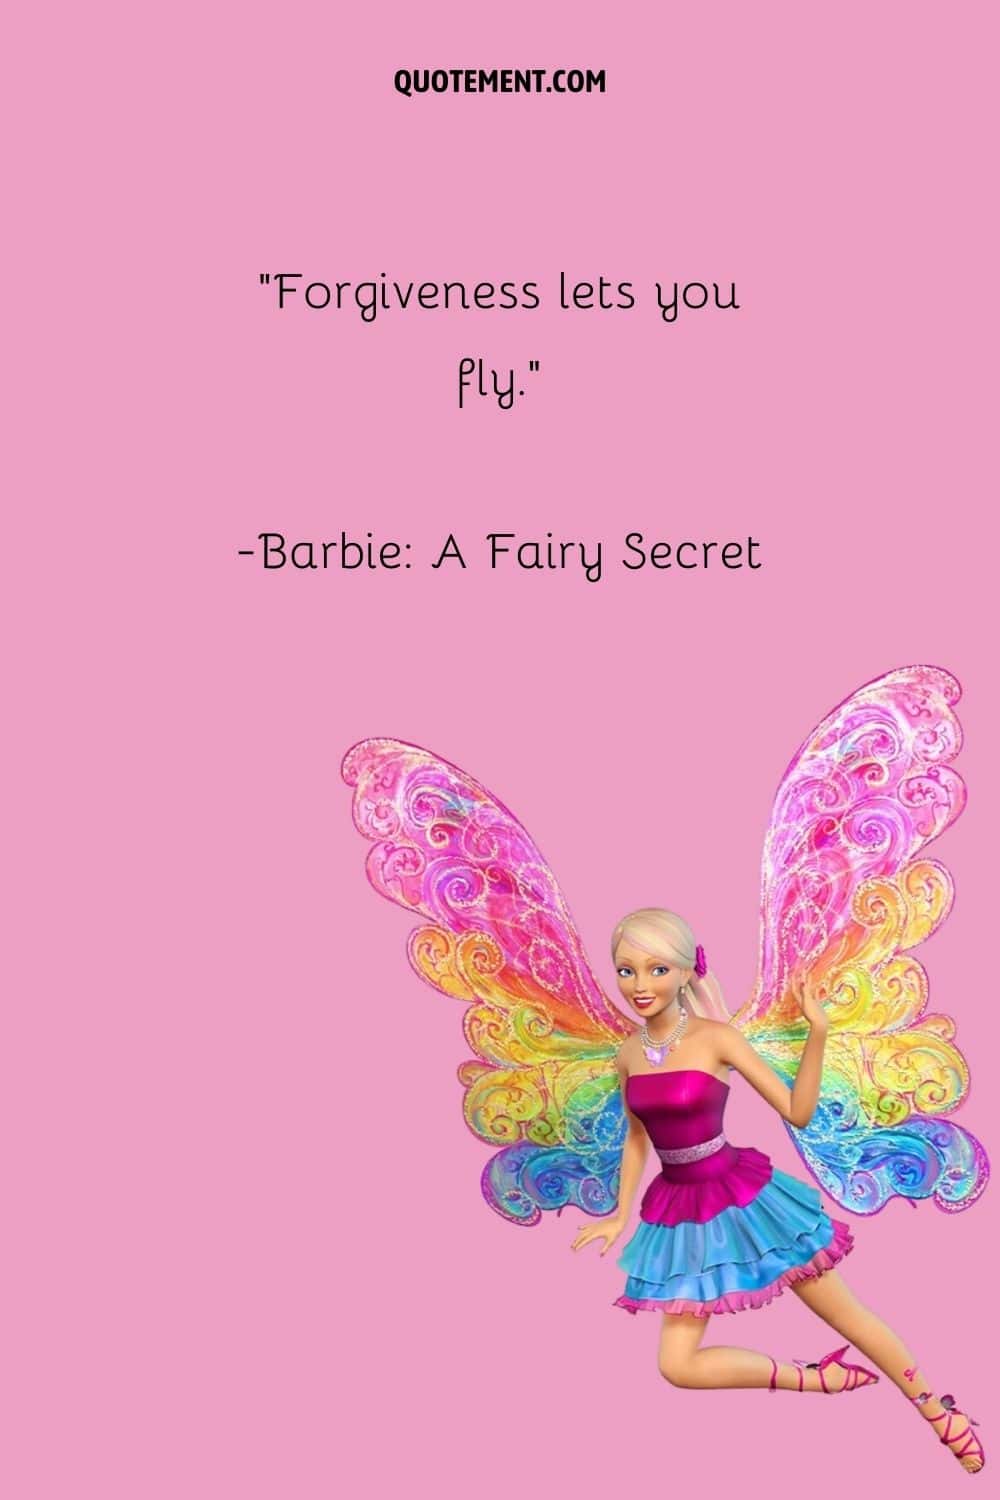 Forgiveness lets you fly.